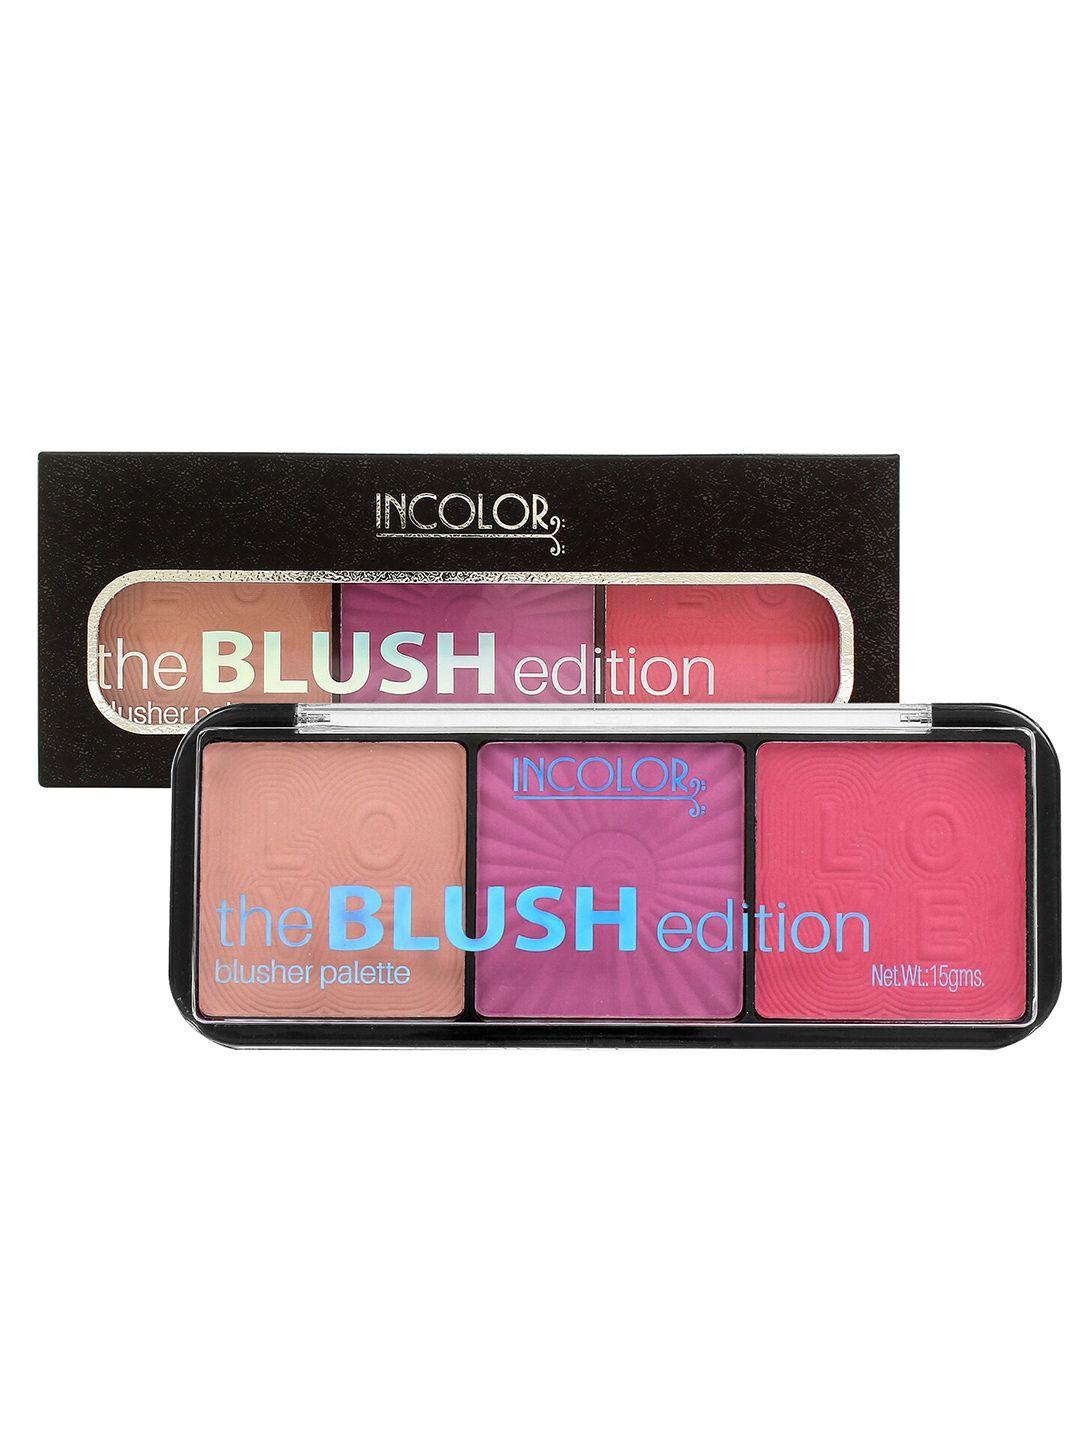 incolor the blush edition blusher palette 15g - shade 04